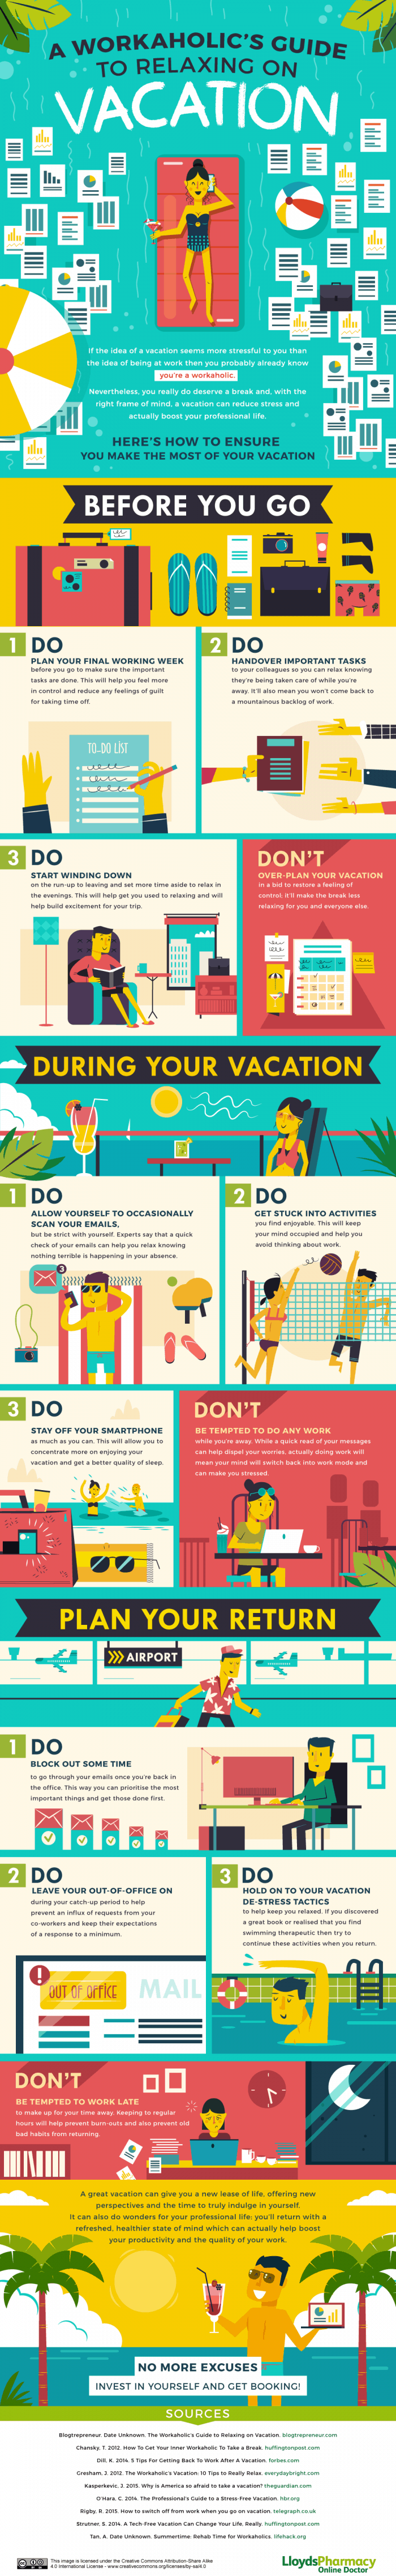 Workaholics Vacation guide infographic